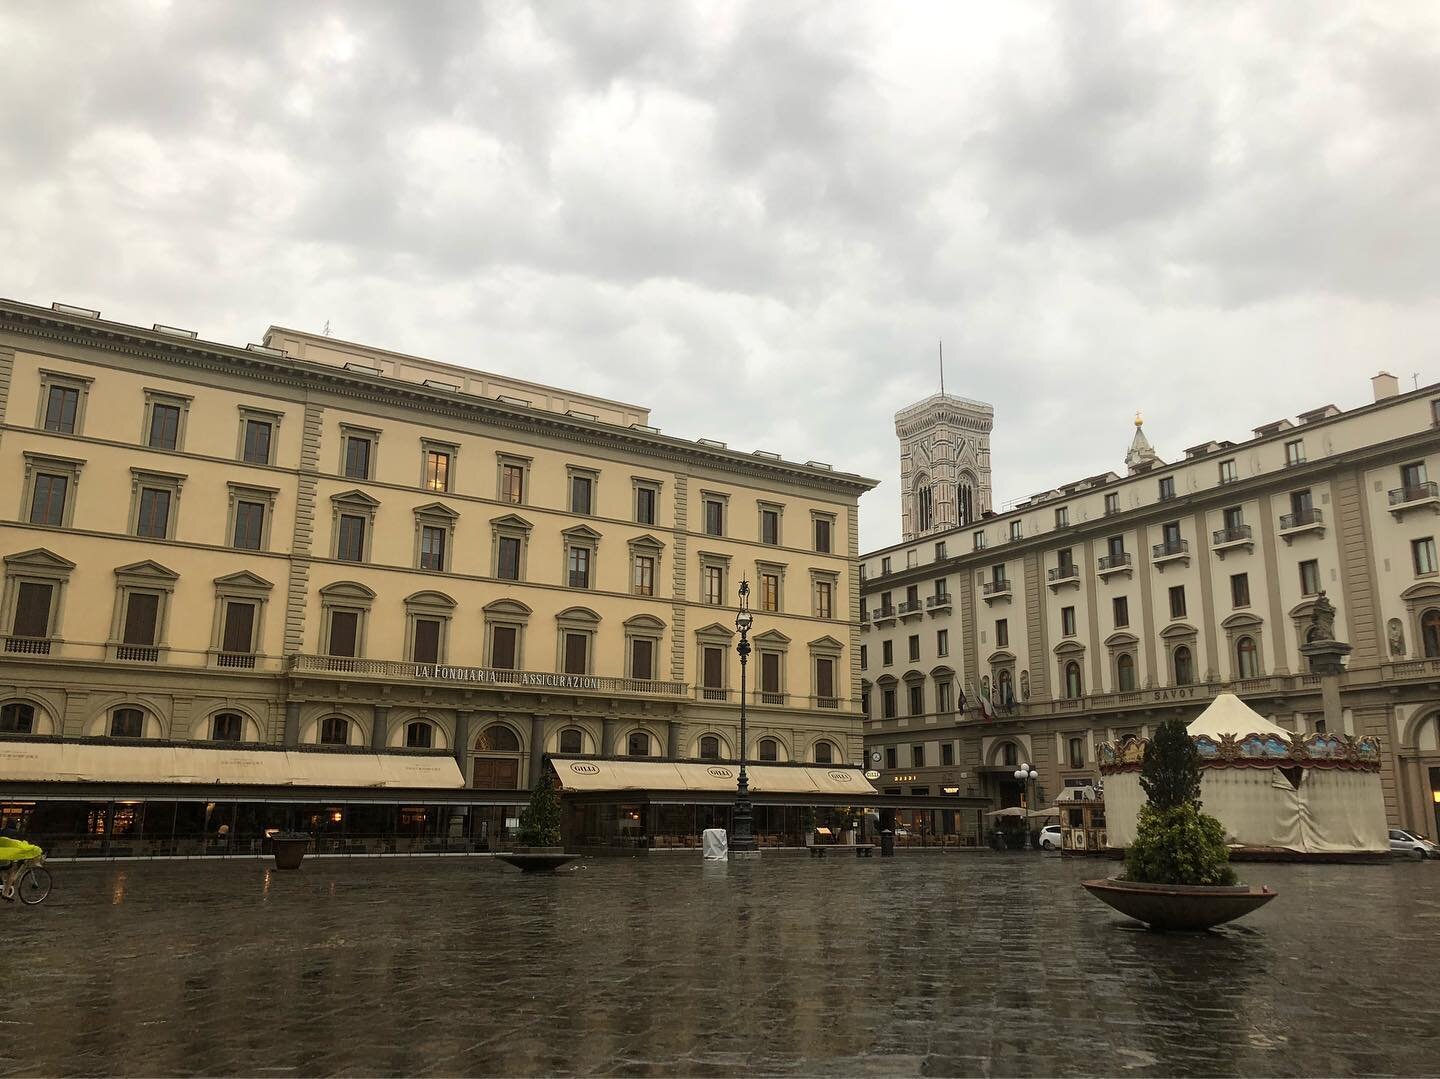 A rainy day in Florence. #firenze #florence #italy #italia #pioggia